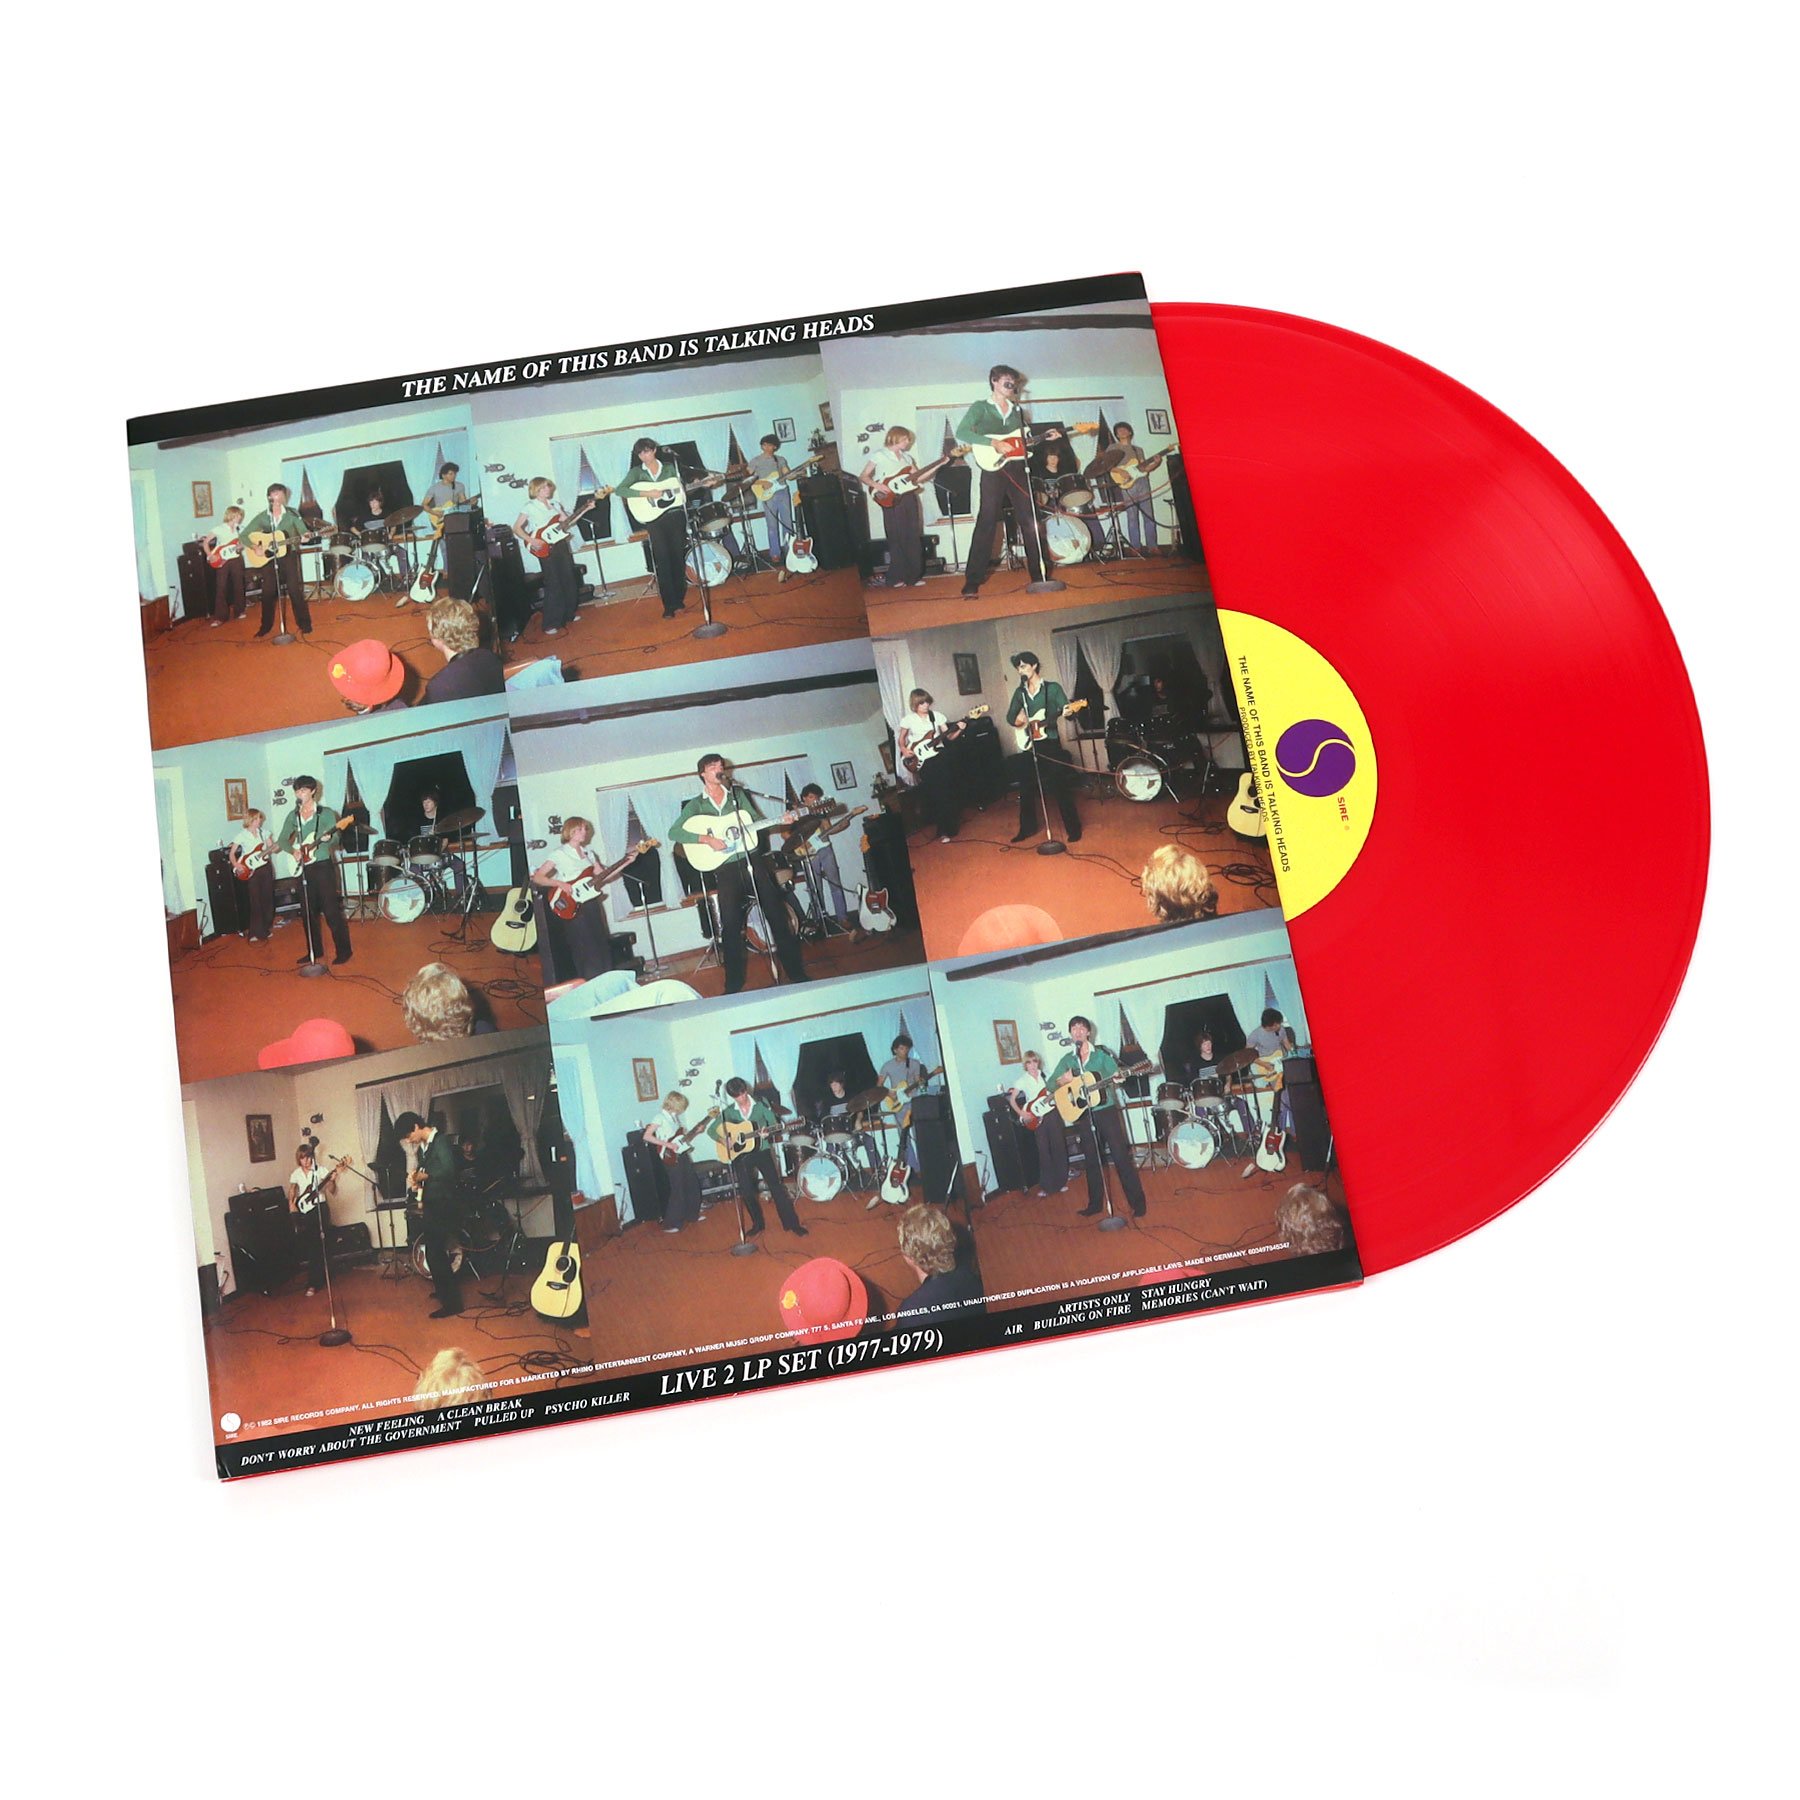 Talking Heads, The Name Of This Band Is Talking Heads, 2LP 180 GRAM Red  Opaque vinyl, SYEOR Exclusive